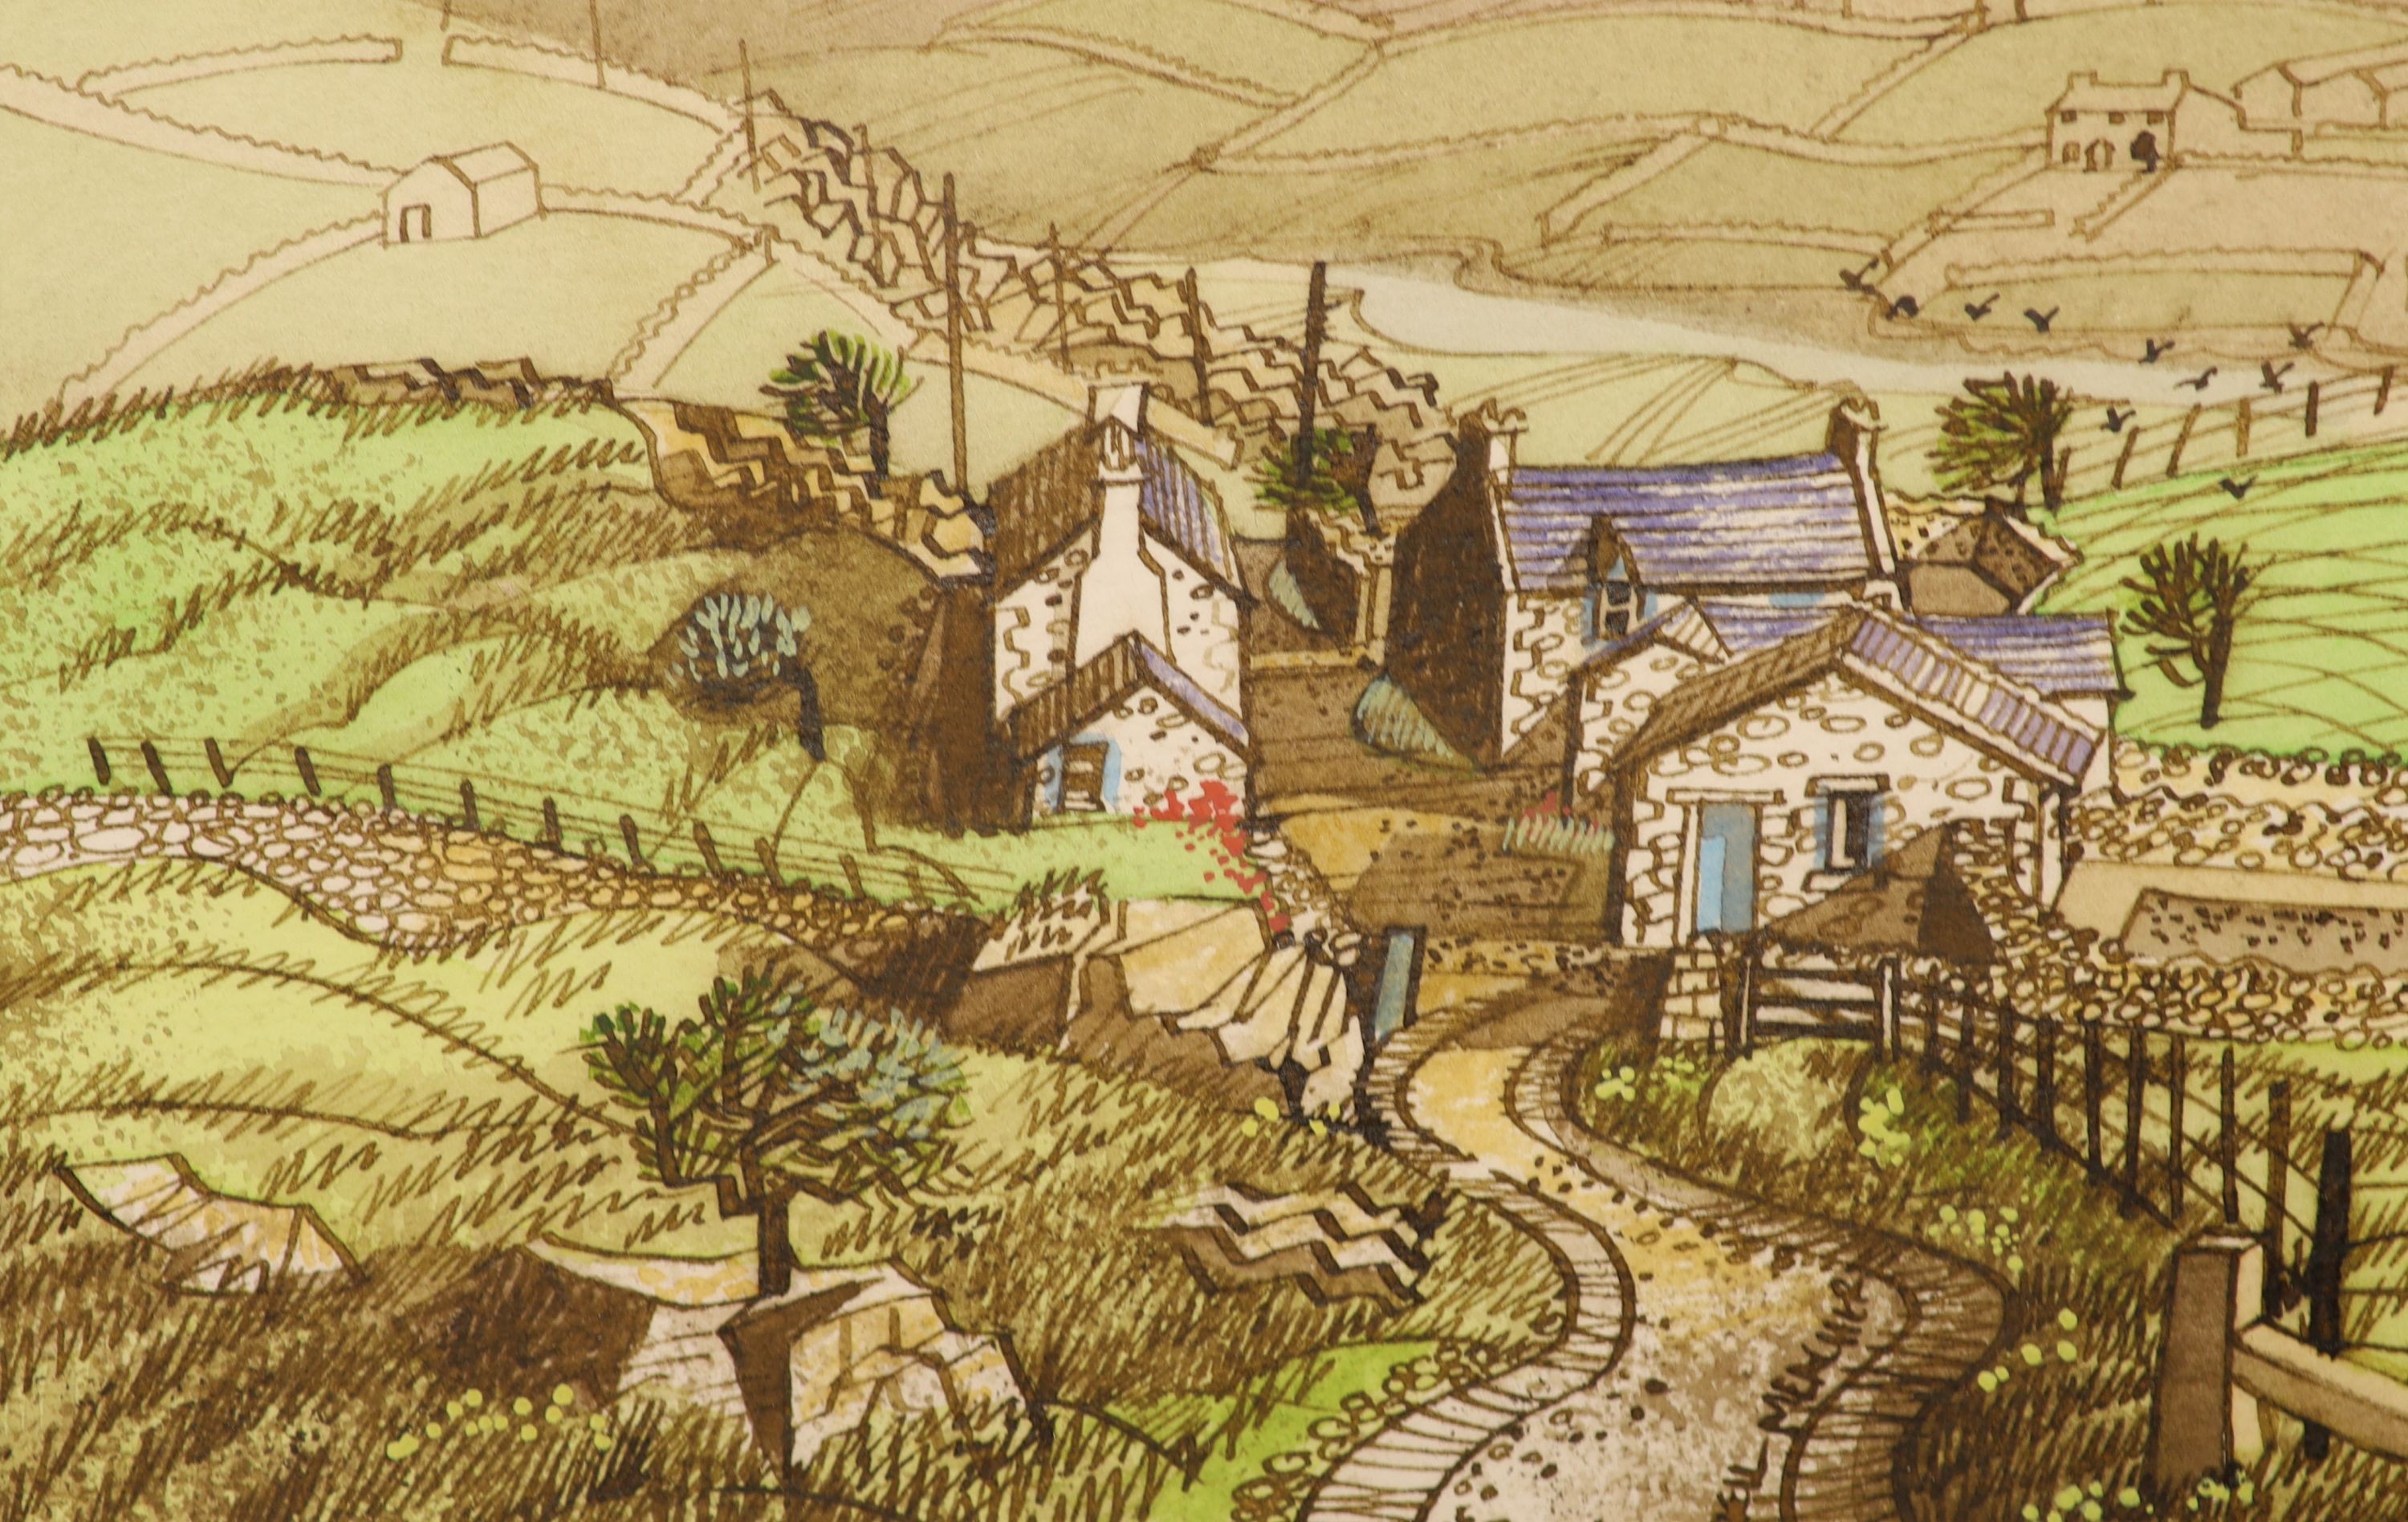 Neil Meacher (1934-2010), ink and watercolour, Welsh Farm, Snowdonia, signed and inscribed verso 10x16cm